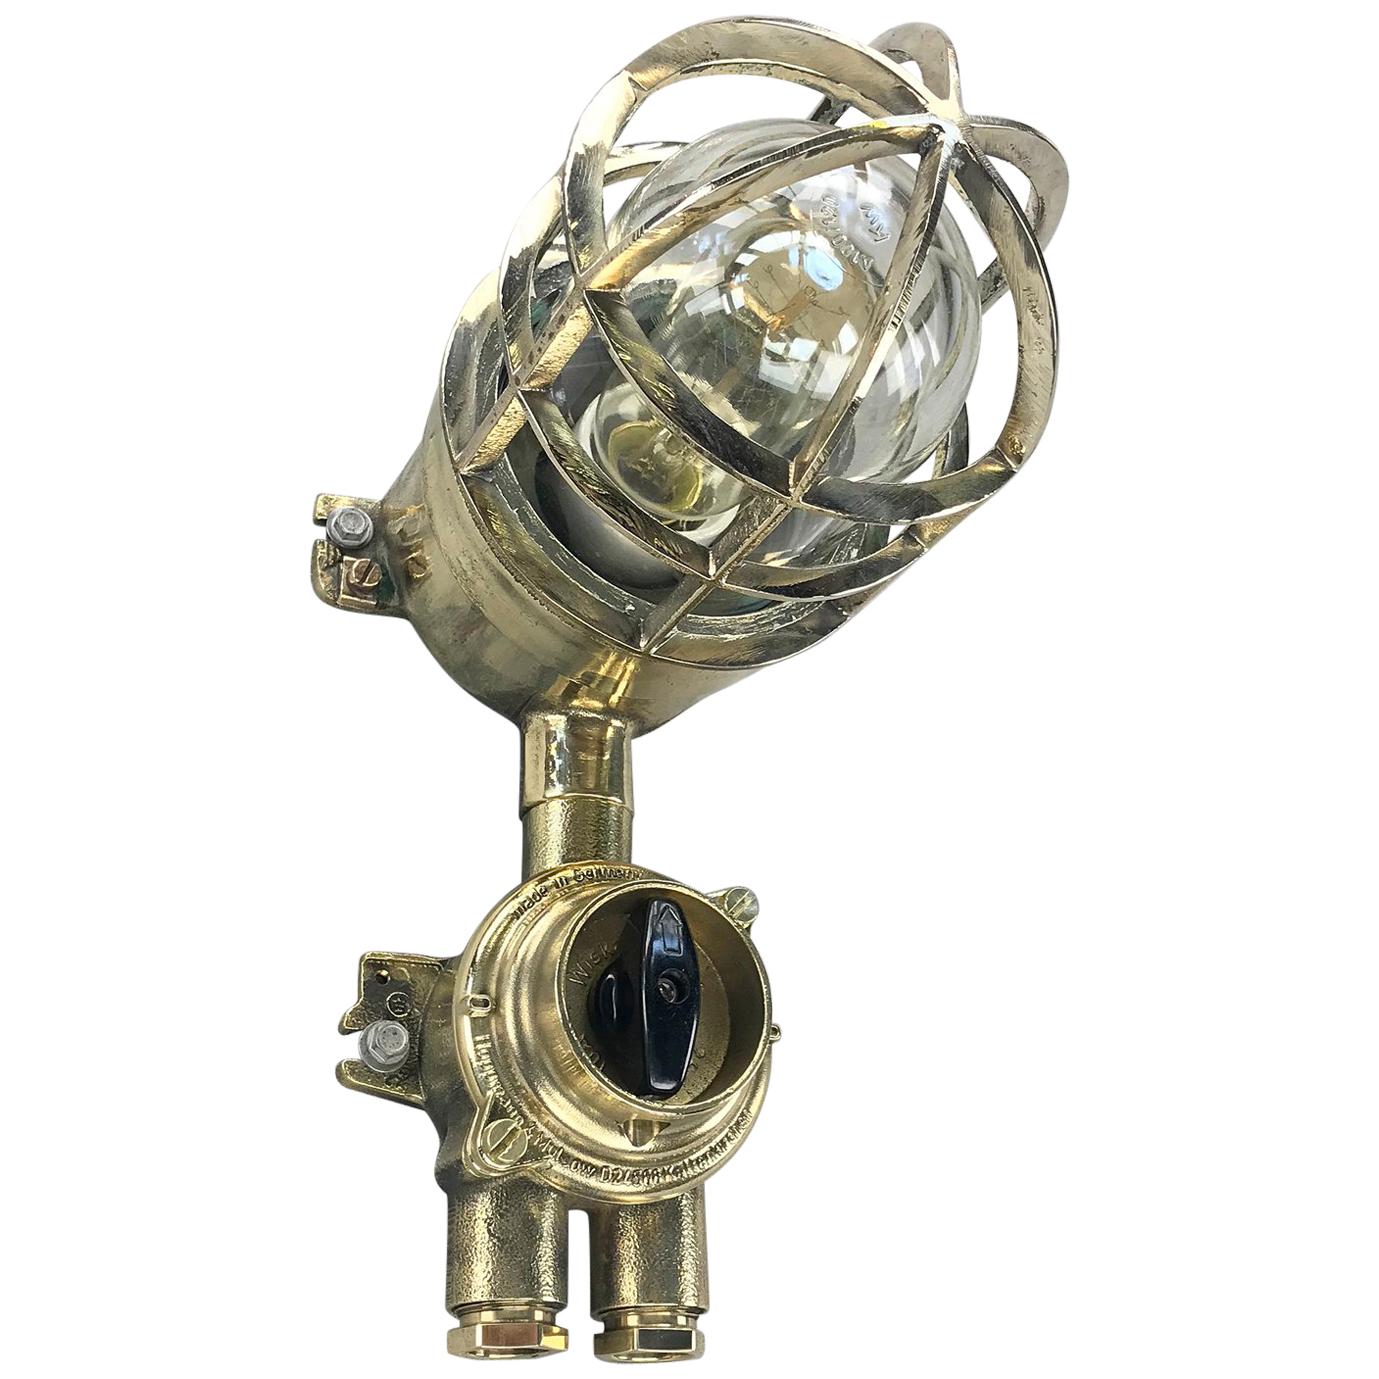 1970s German Explosion Proof Wall Light Cast Brass, Glass Shade & Rotary Switch For Sale